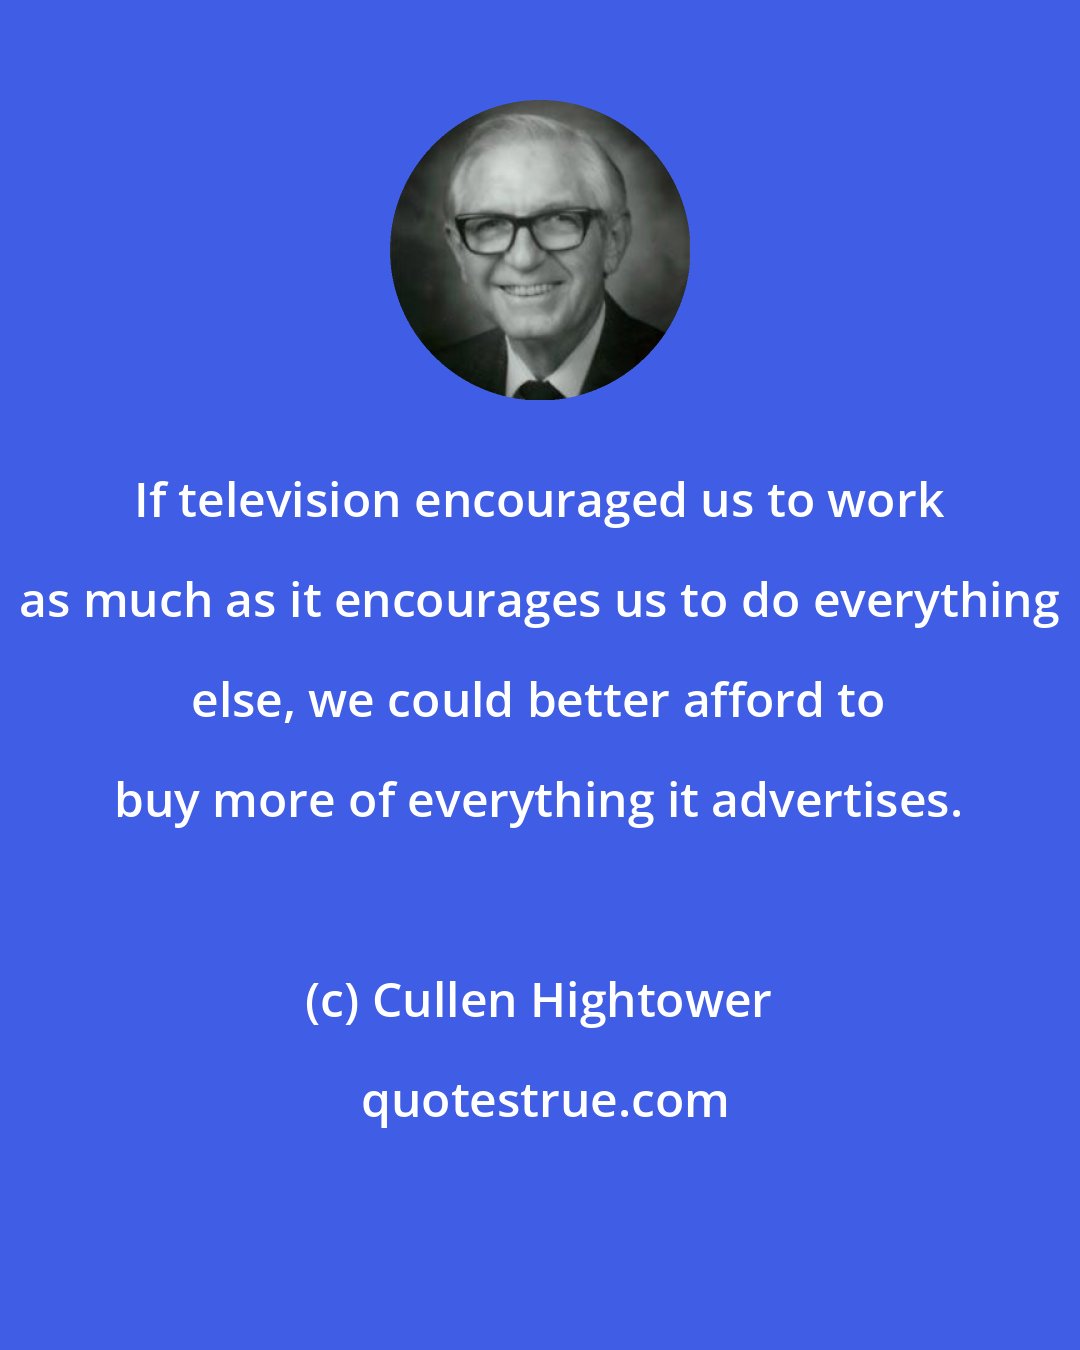 Cullen Hightower: If television encouraged us to work as much as it encourages us to do everything else, we could better afford to buy more of everything it advertises.